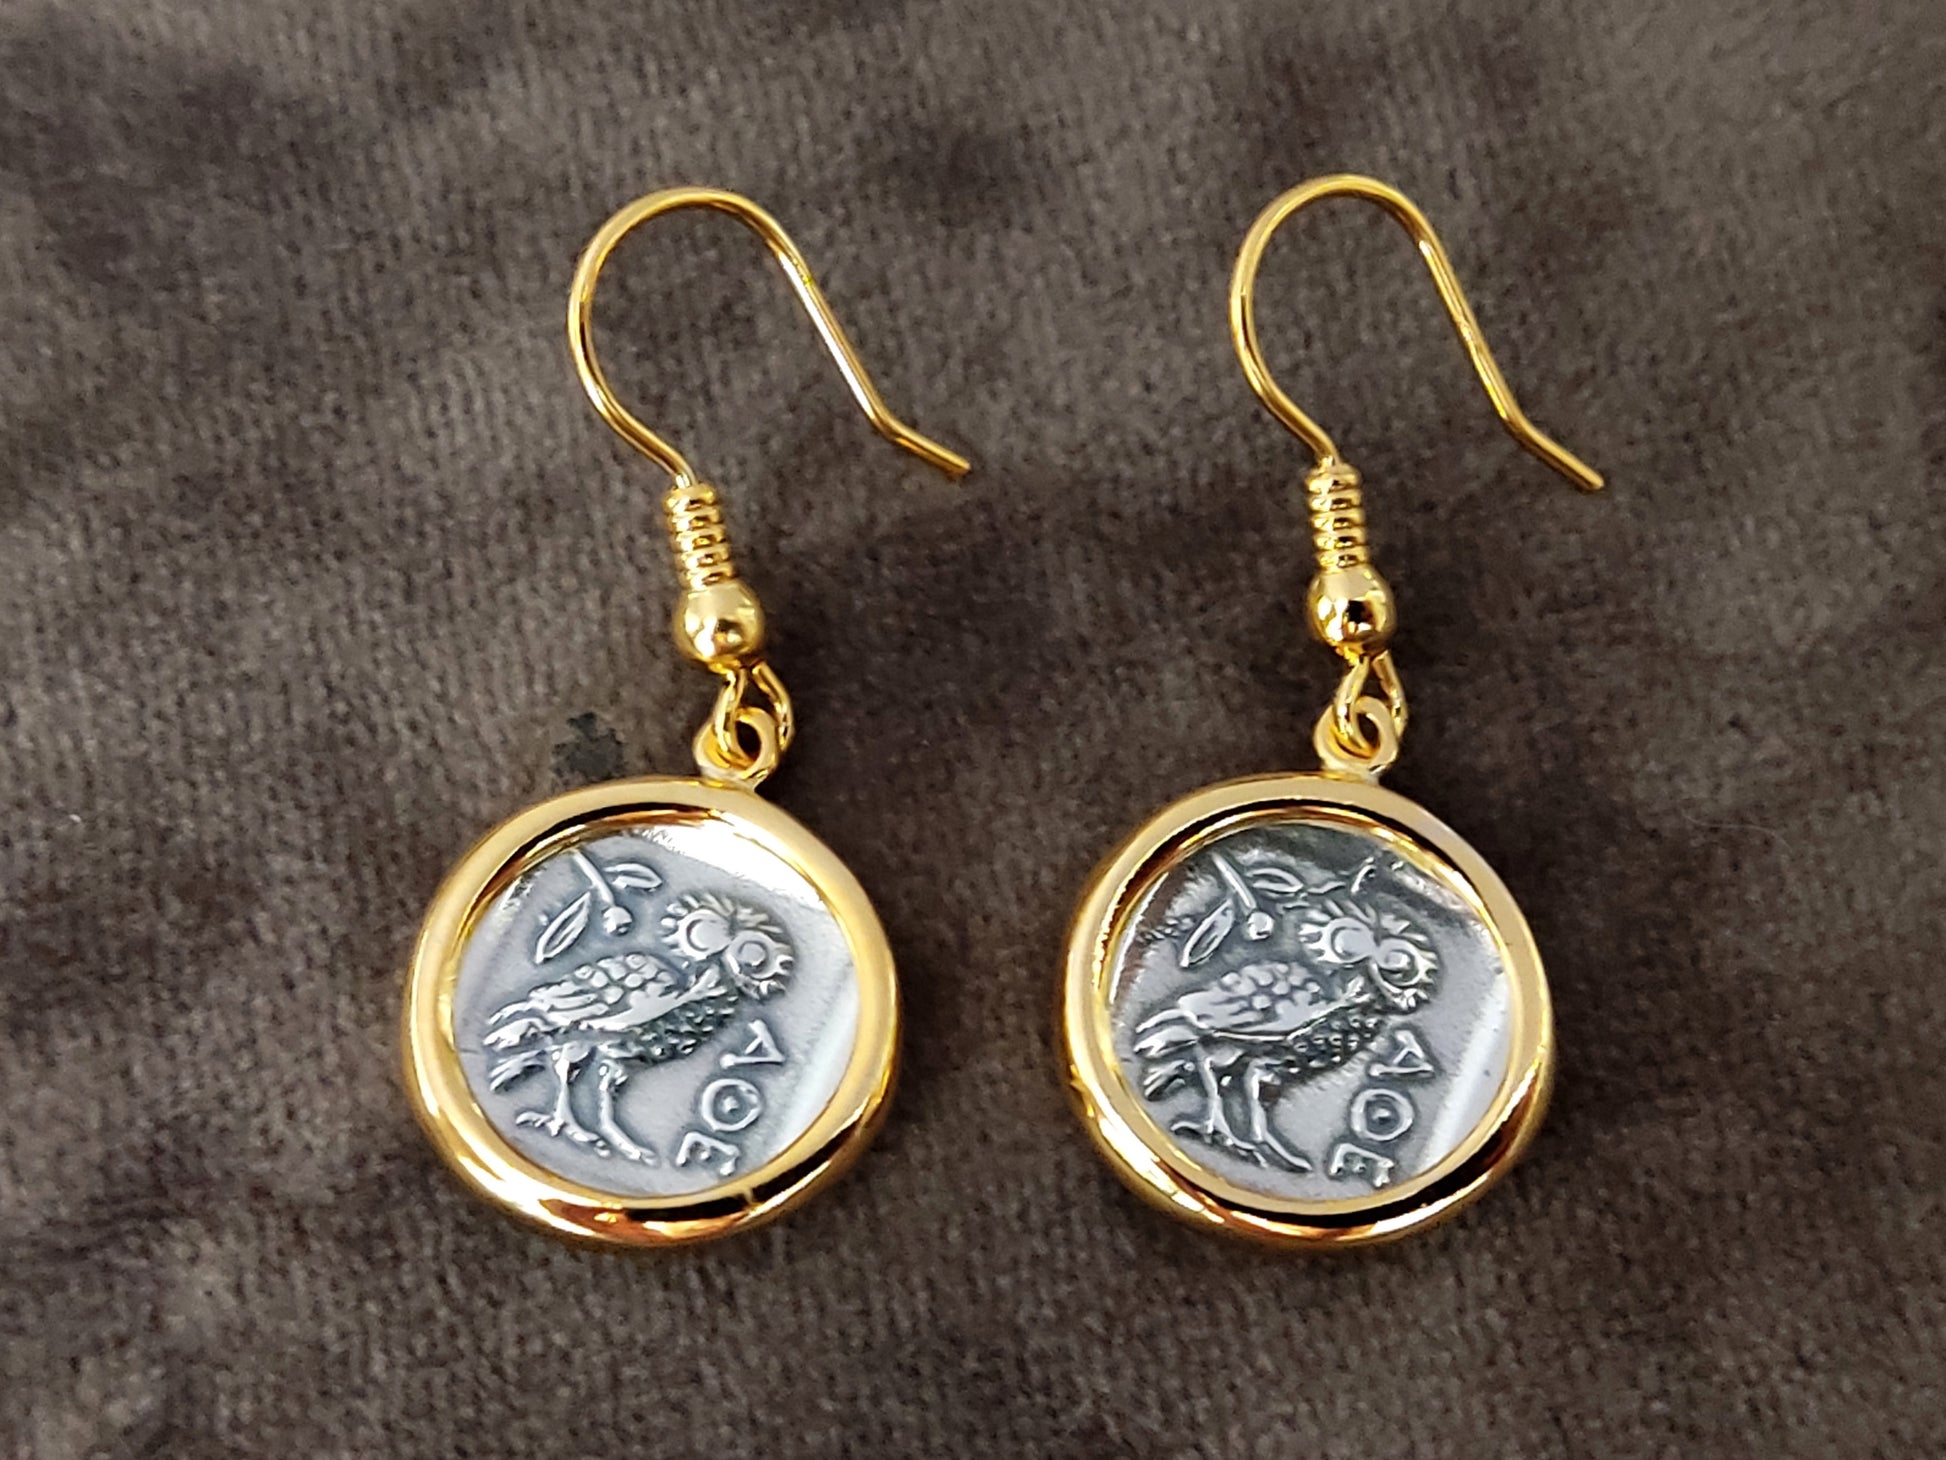 Greek silver earrings with the owl and goddess Athena on gray velvet.